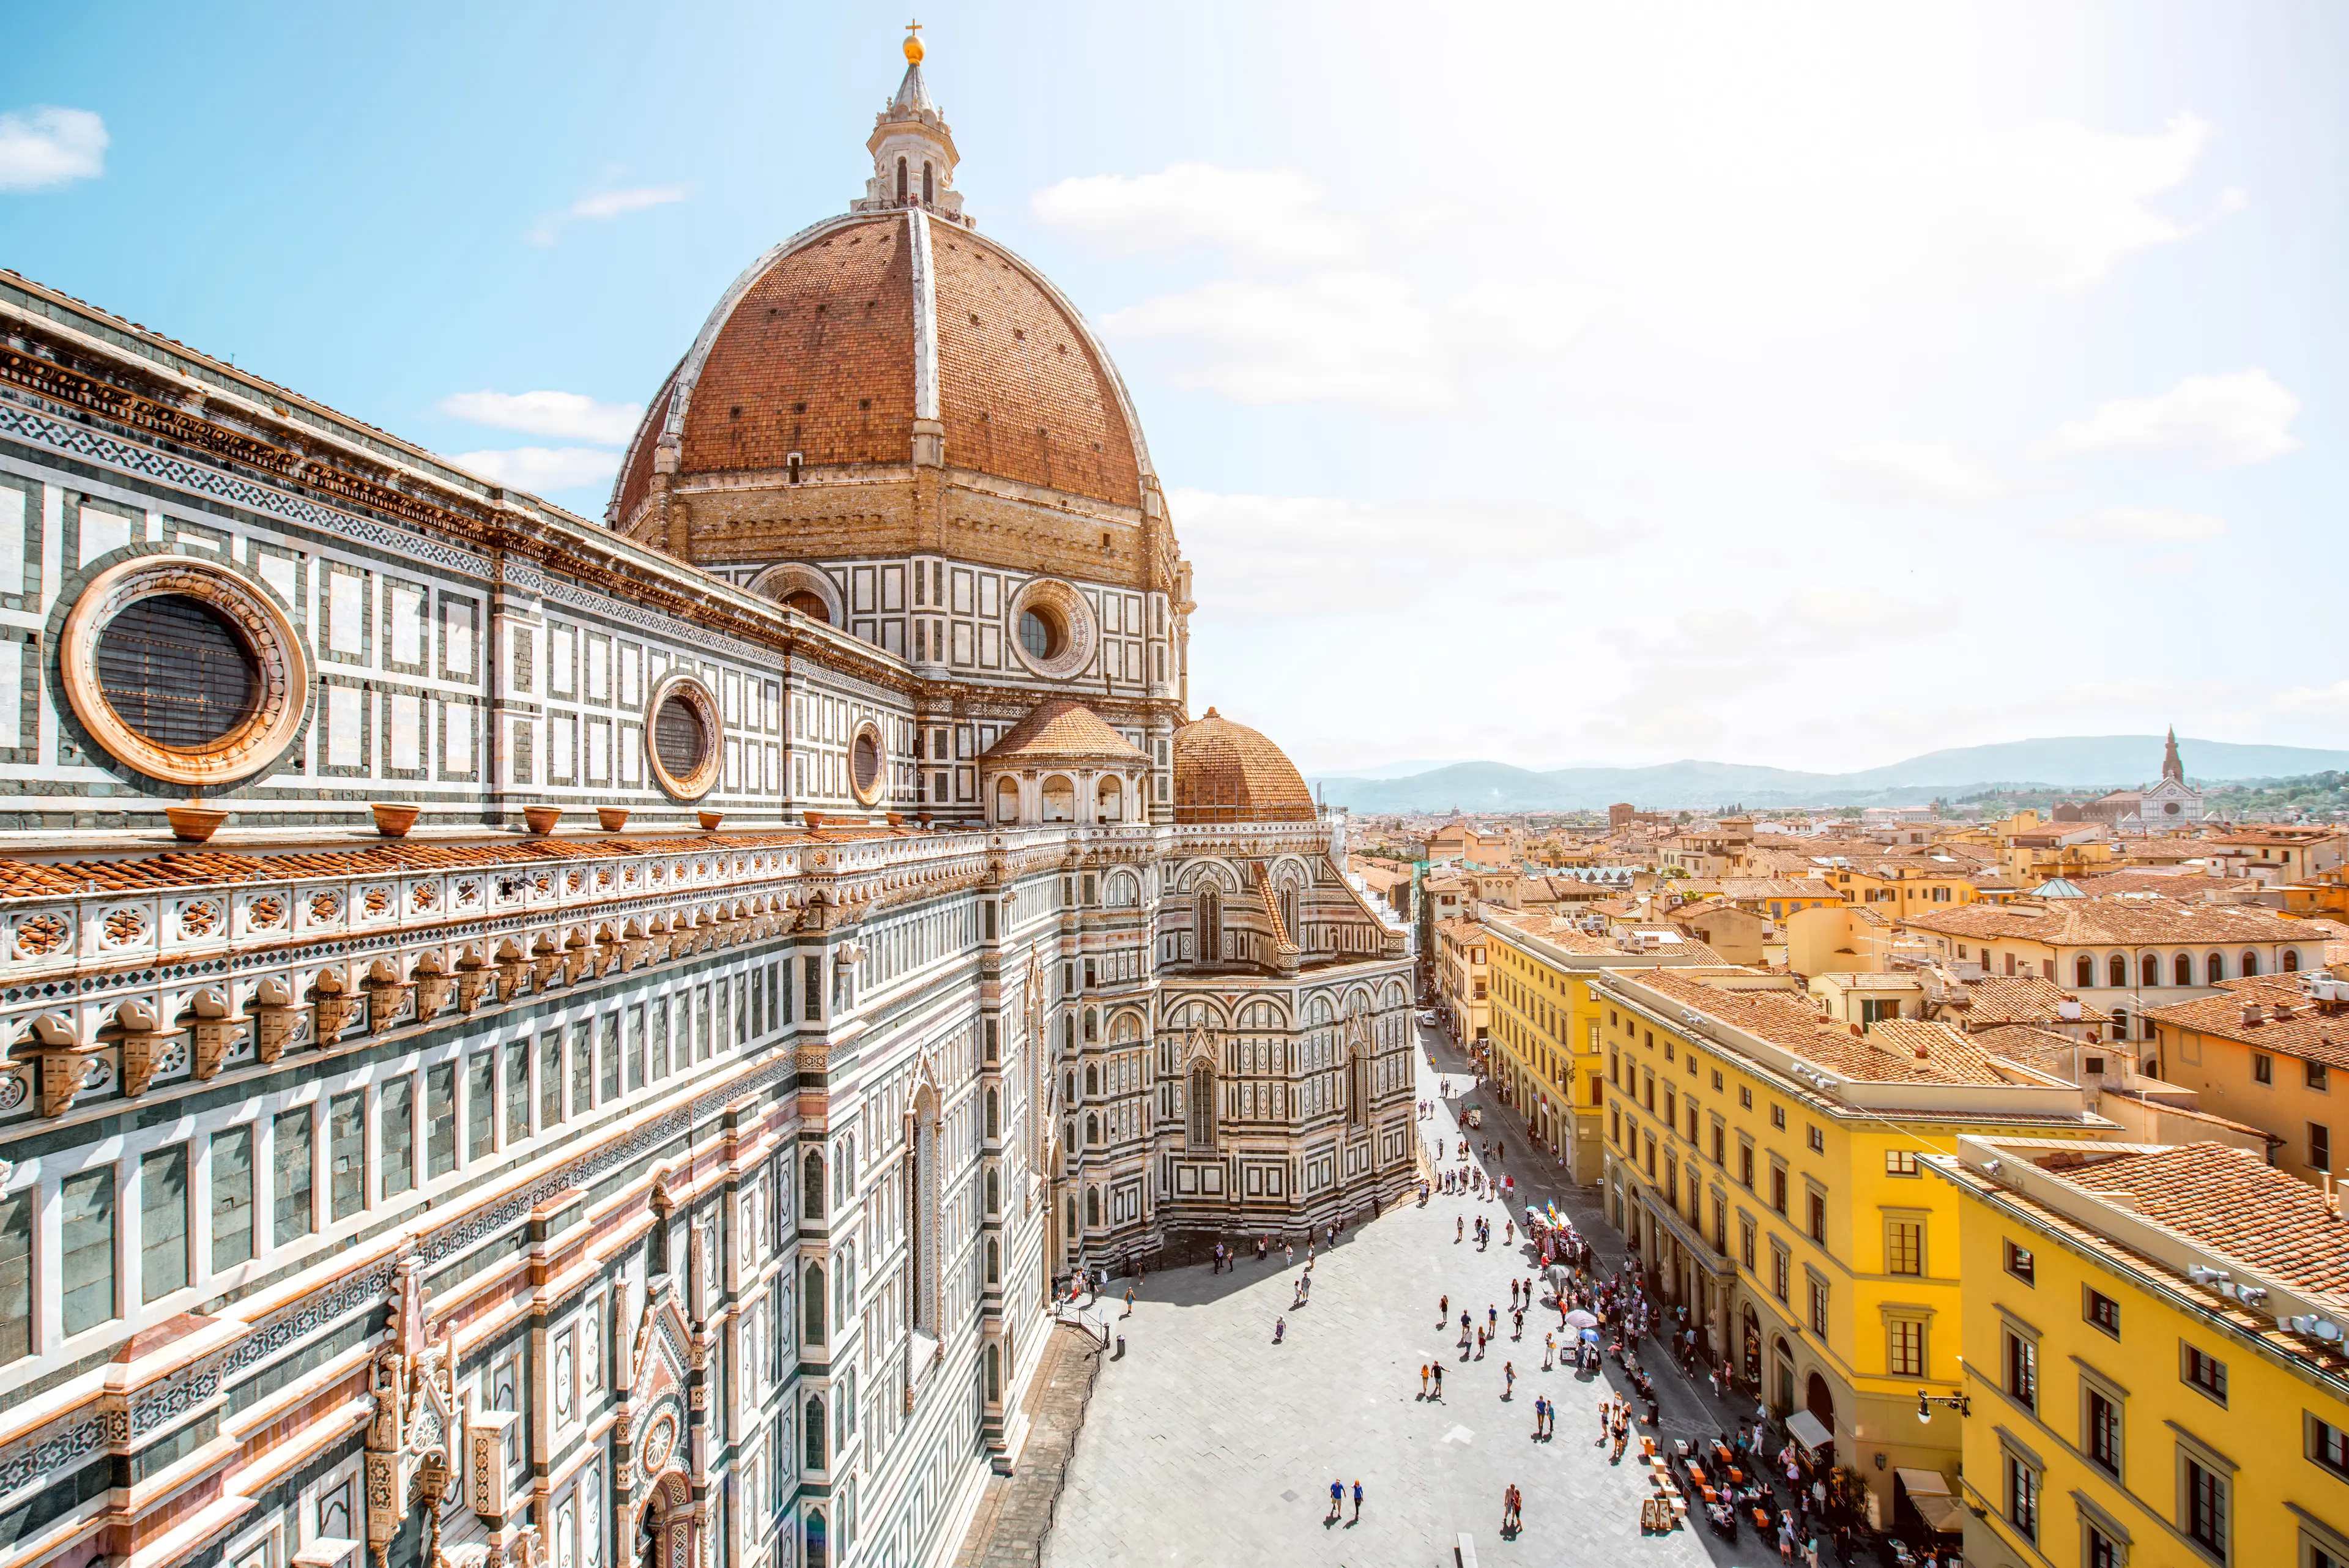 3-Day Family Relaxation and Sightseeing Itinerary in Florence, Italy